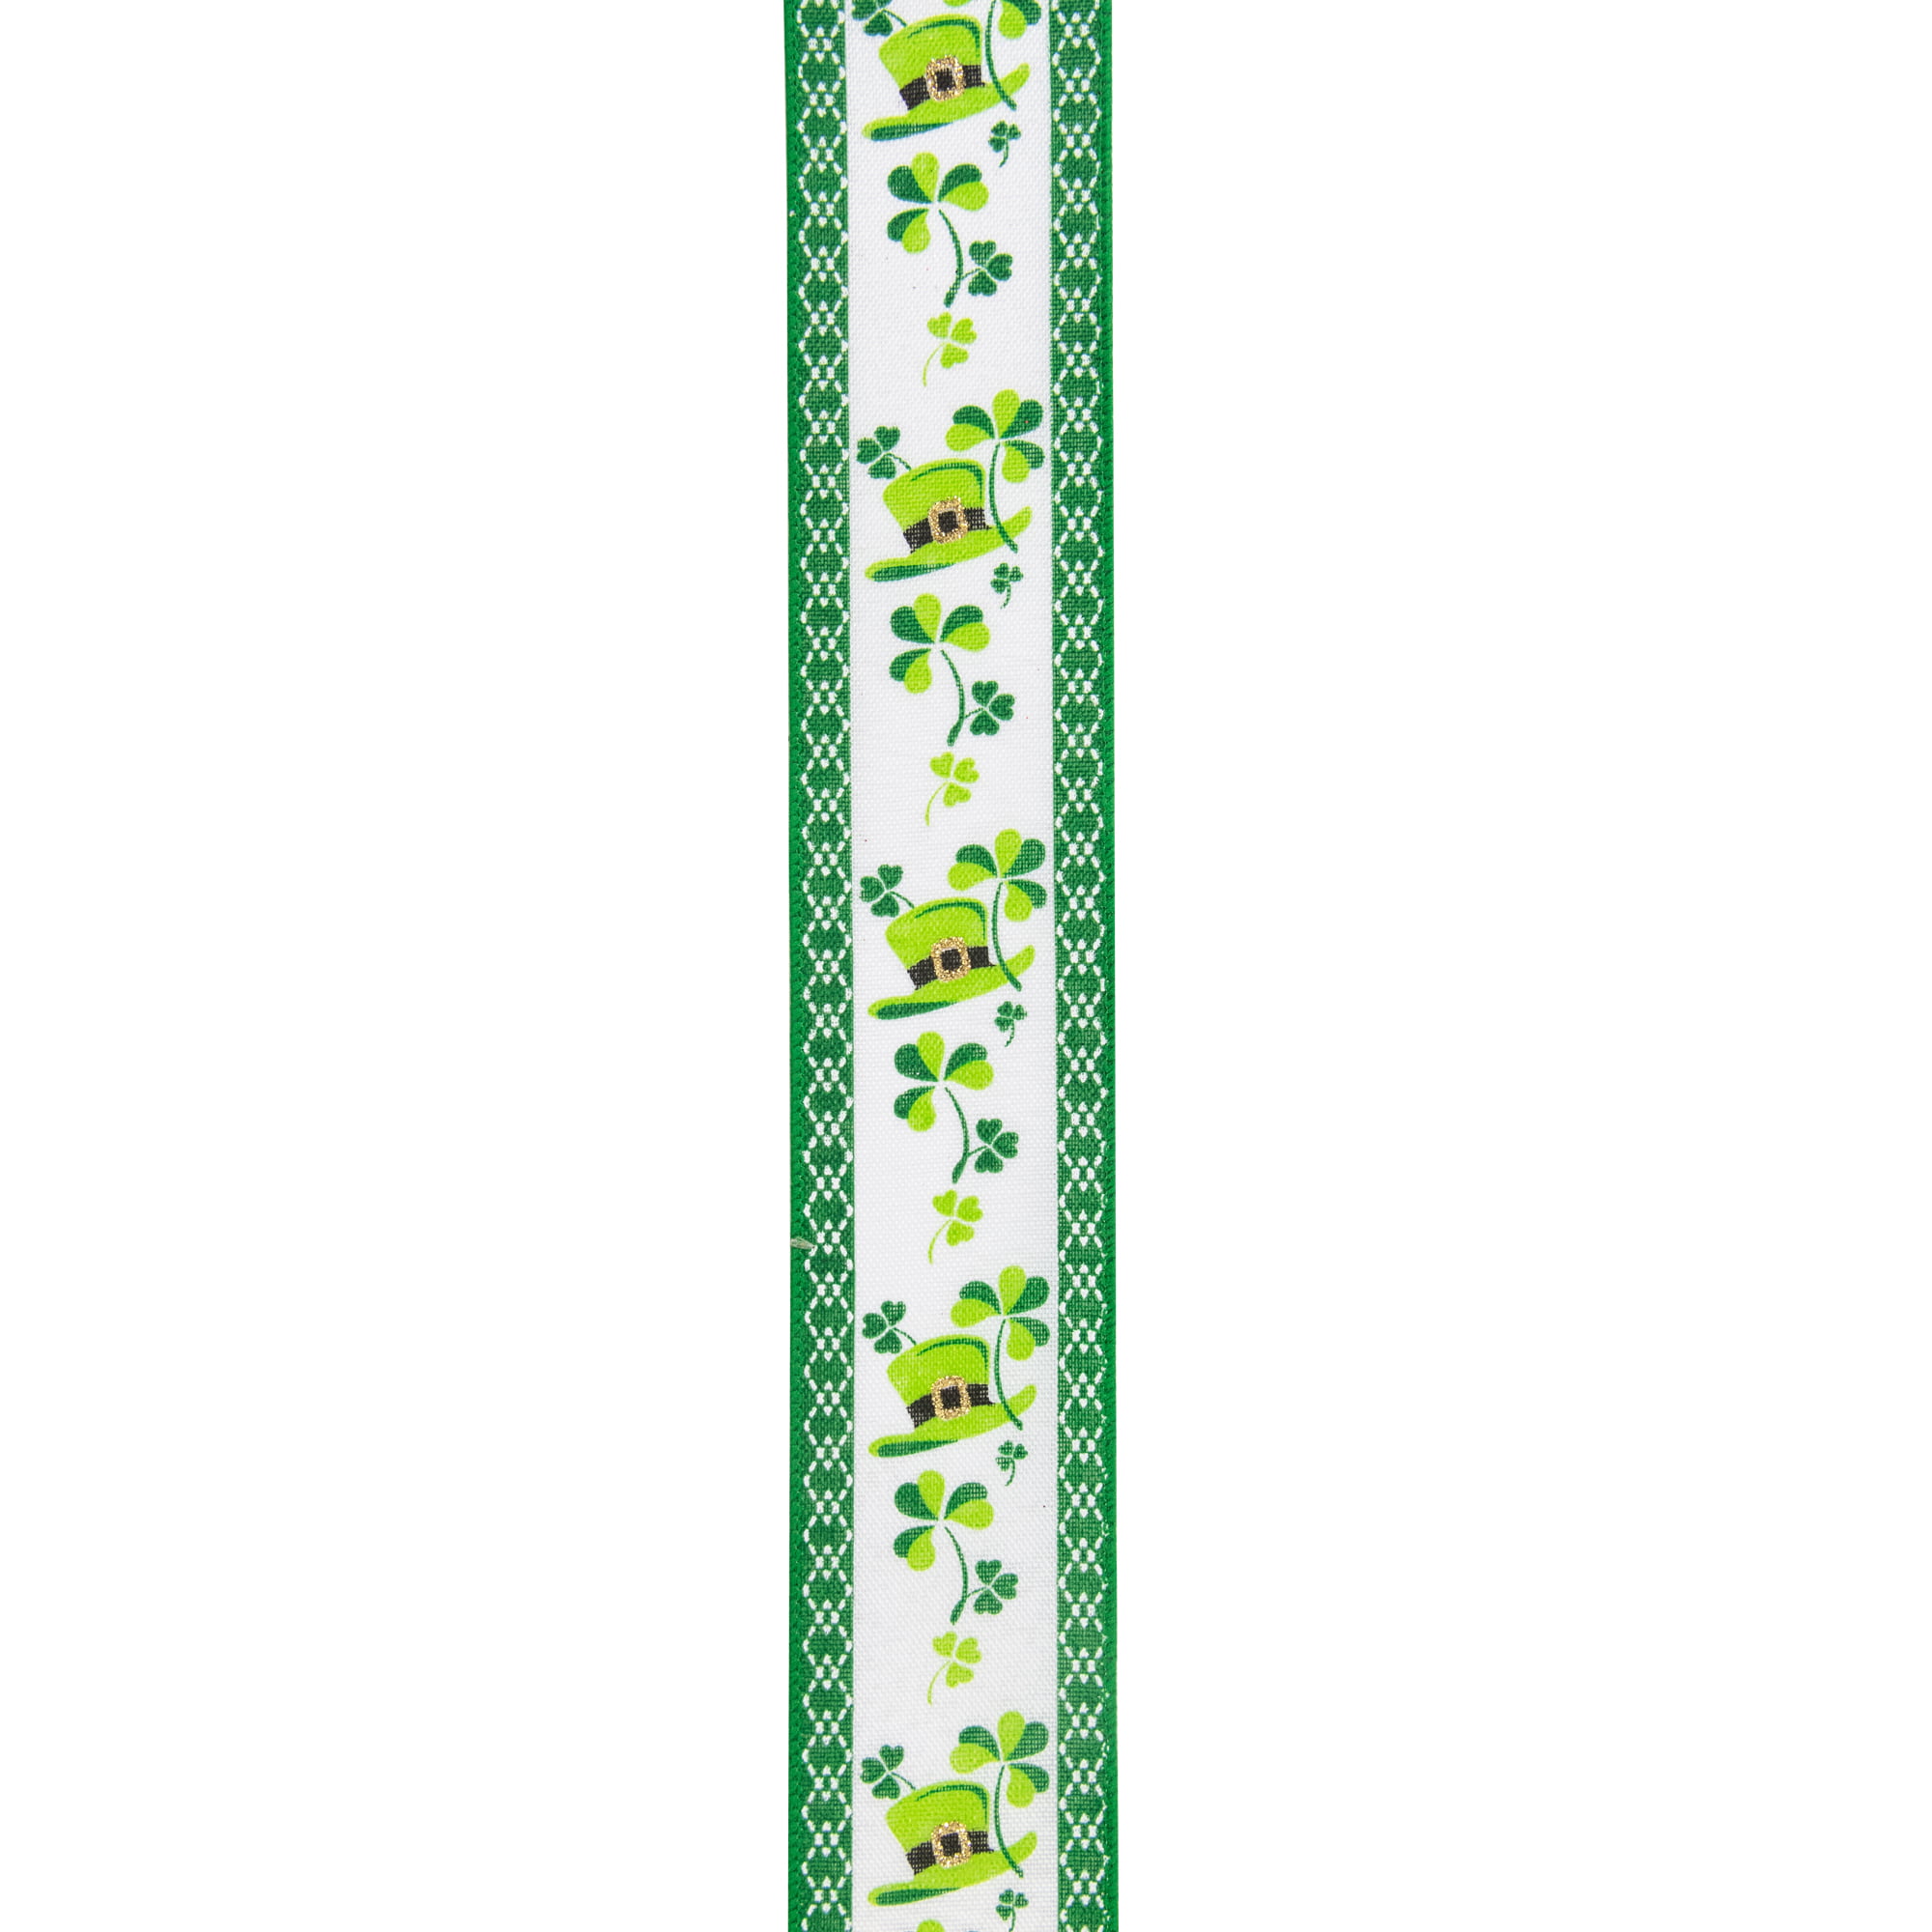 Patrick/'s Day Ribbon St Green Ribbon 2 12 Wired Ribbon Clover Ribbon Shamrock Ribbon Wired Ribbon 10 Yard Roll